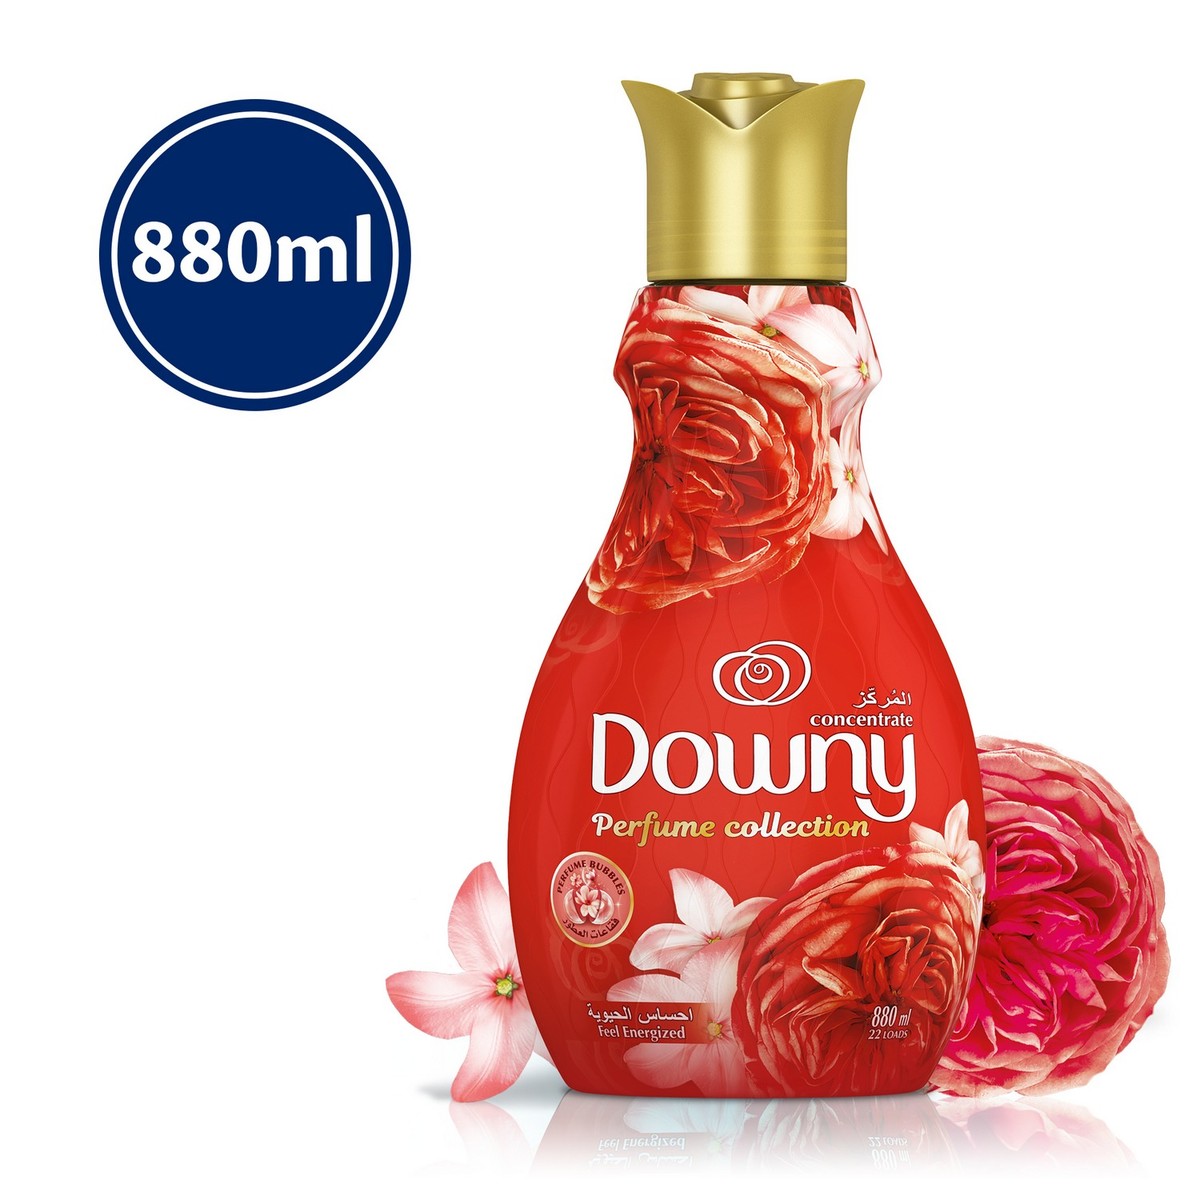 Downy Perfume Collection Concentrate Fabric Softener Feel Energized 880ml